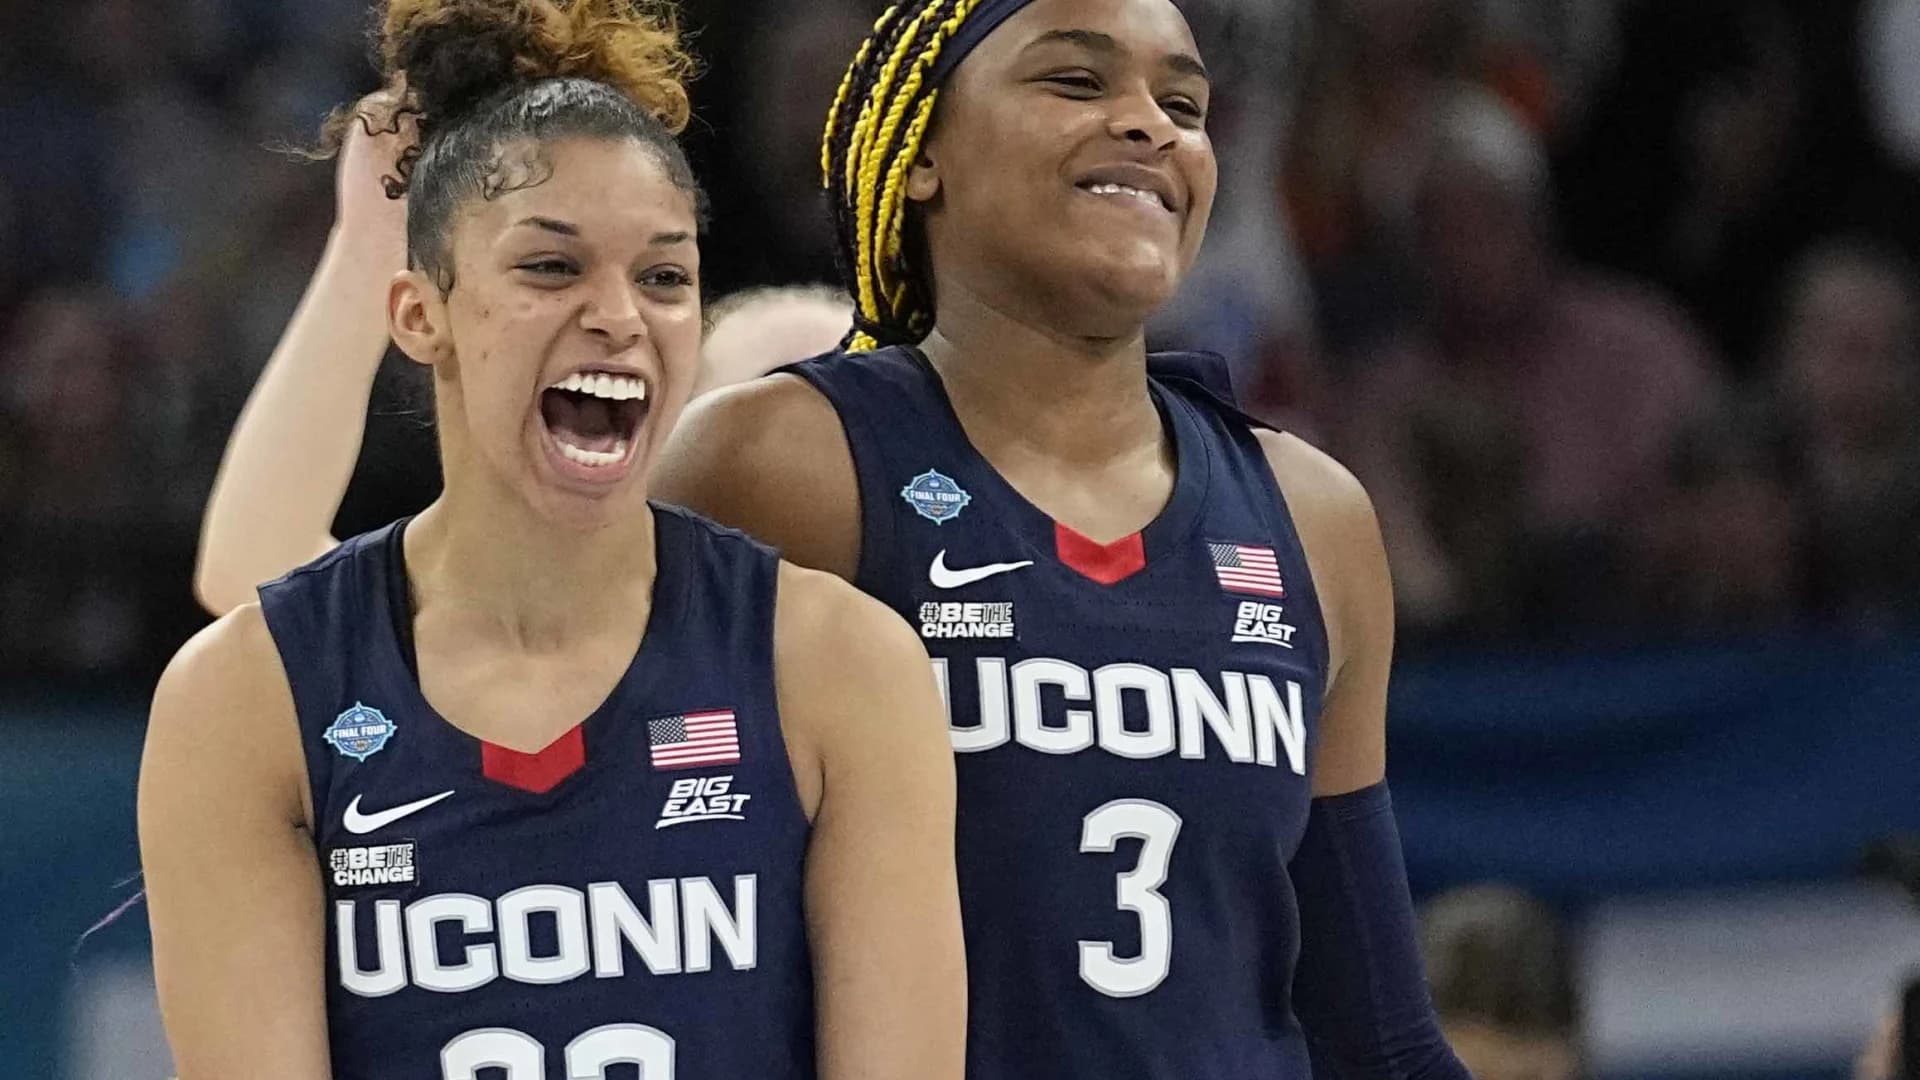 Updates: UConn plays South Carolina for the national championship